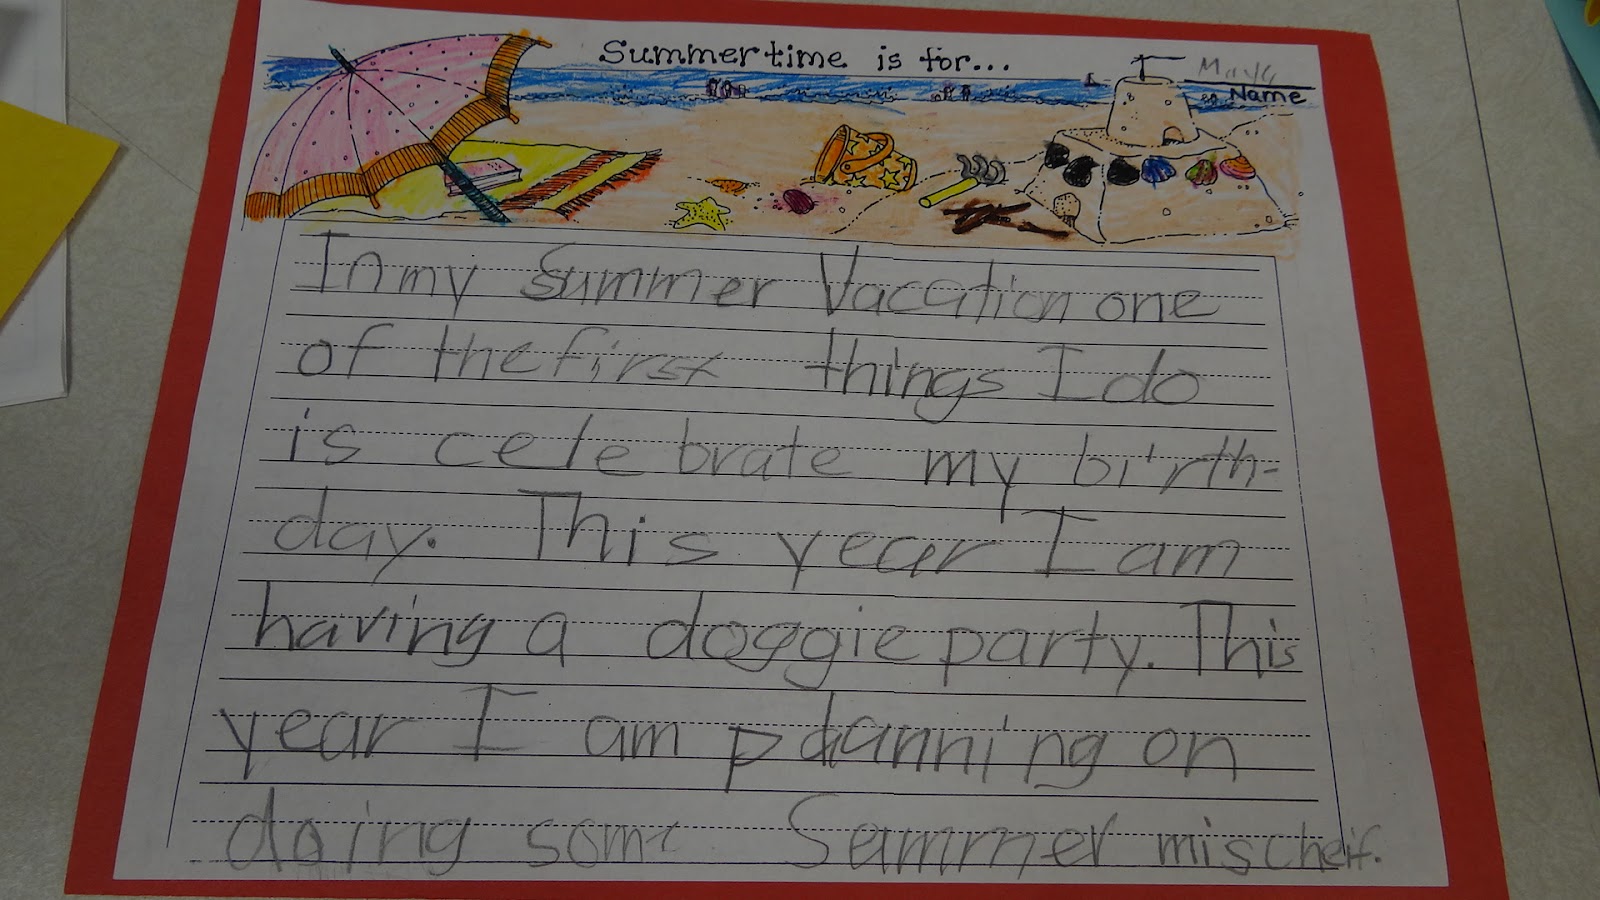 Essay on summer vacation for class 7 in english